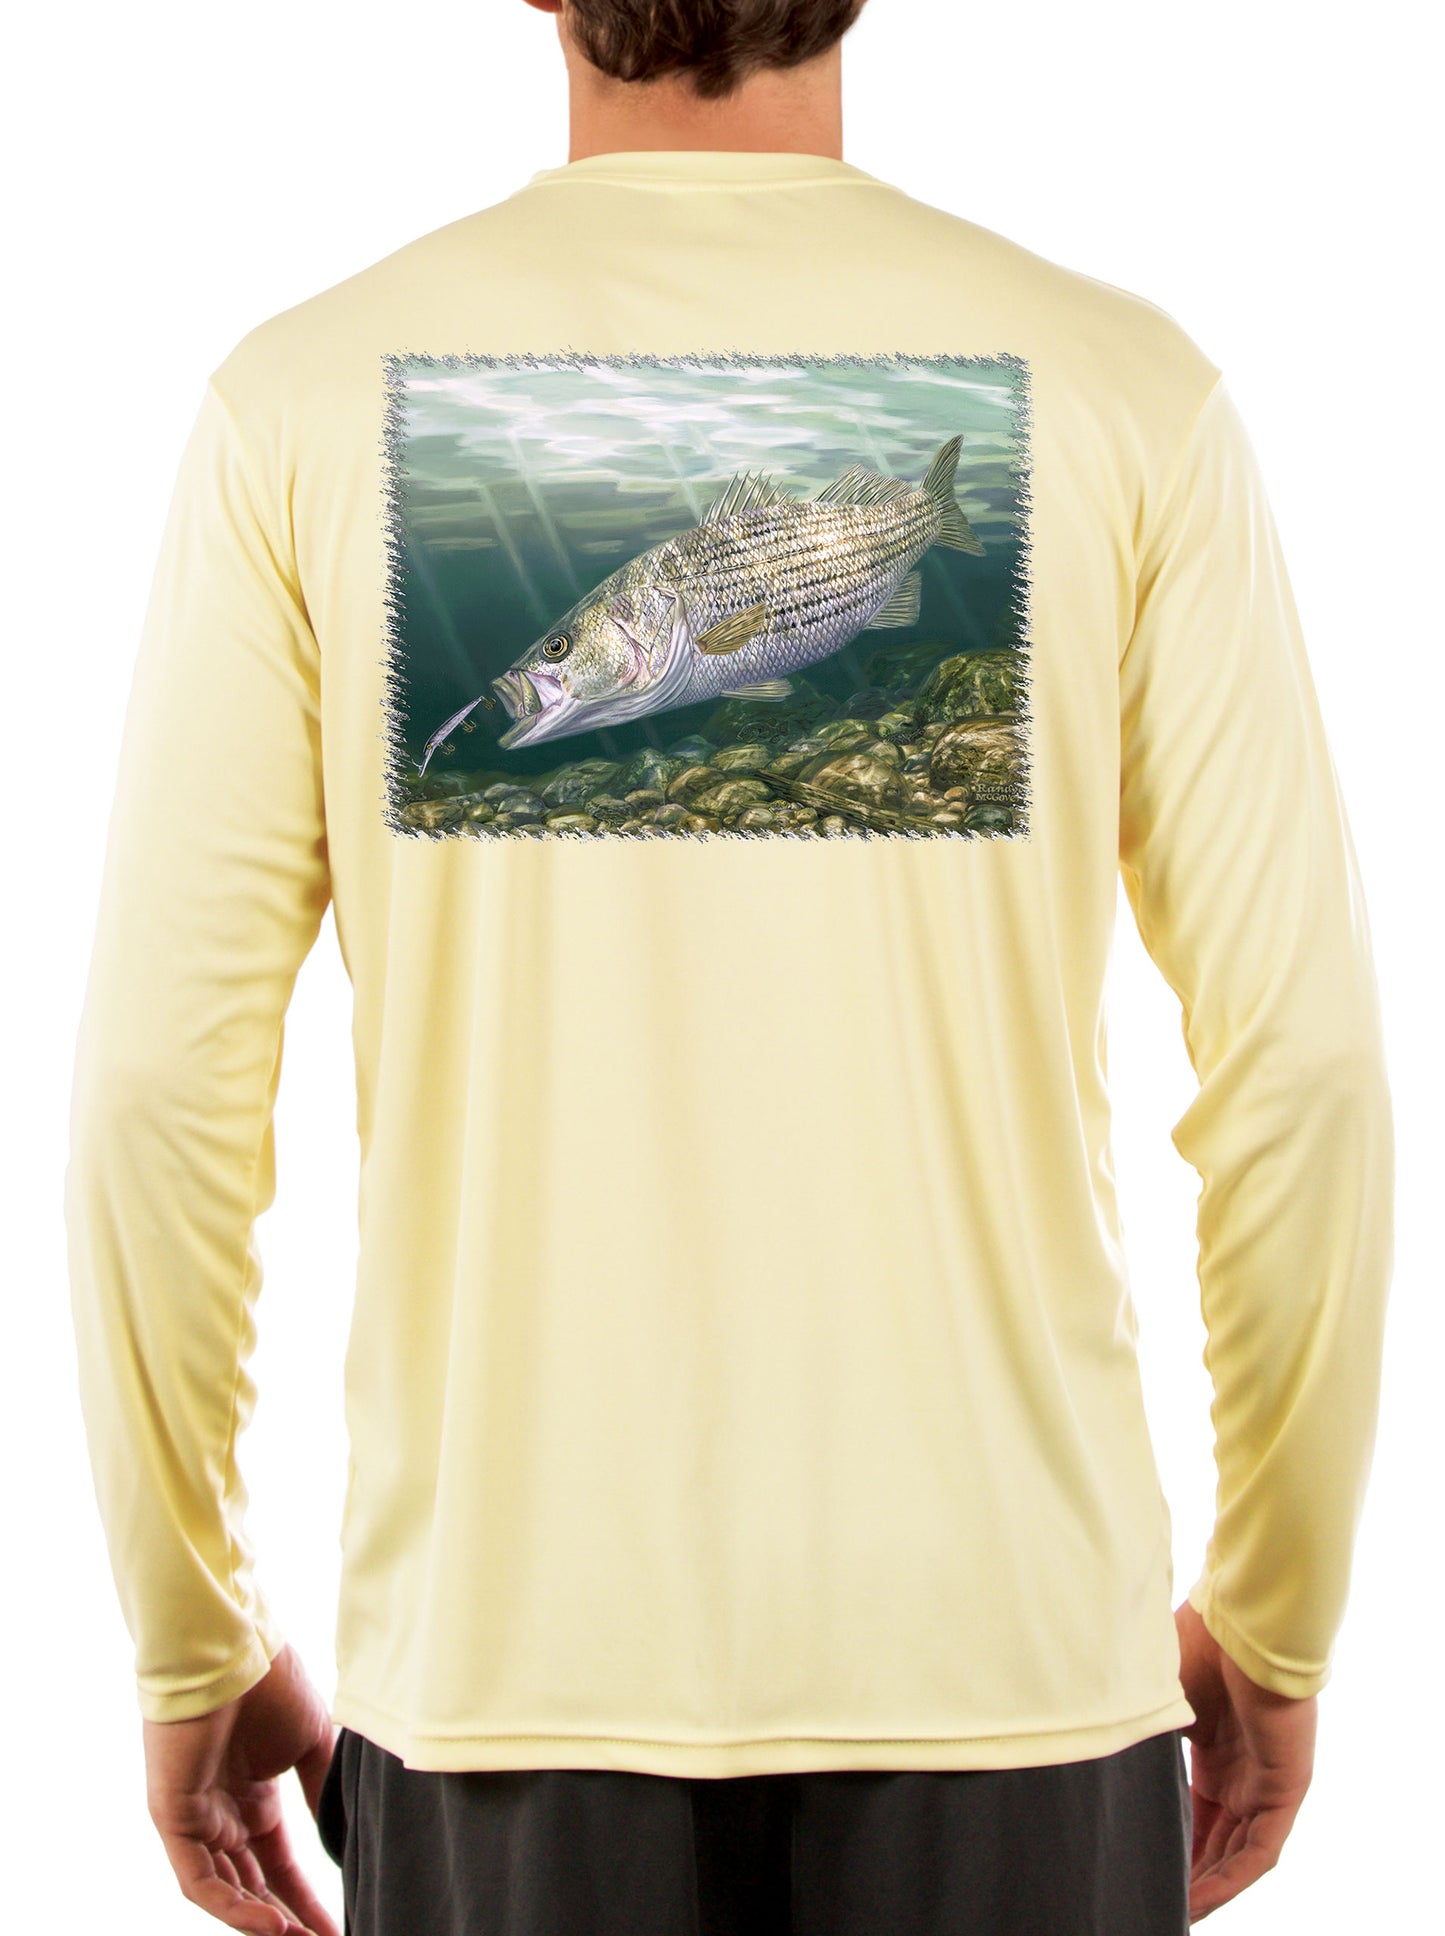 [New] Striper Fishing Shirts for Men with Striped Bass Fish Artwork